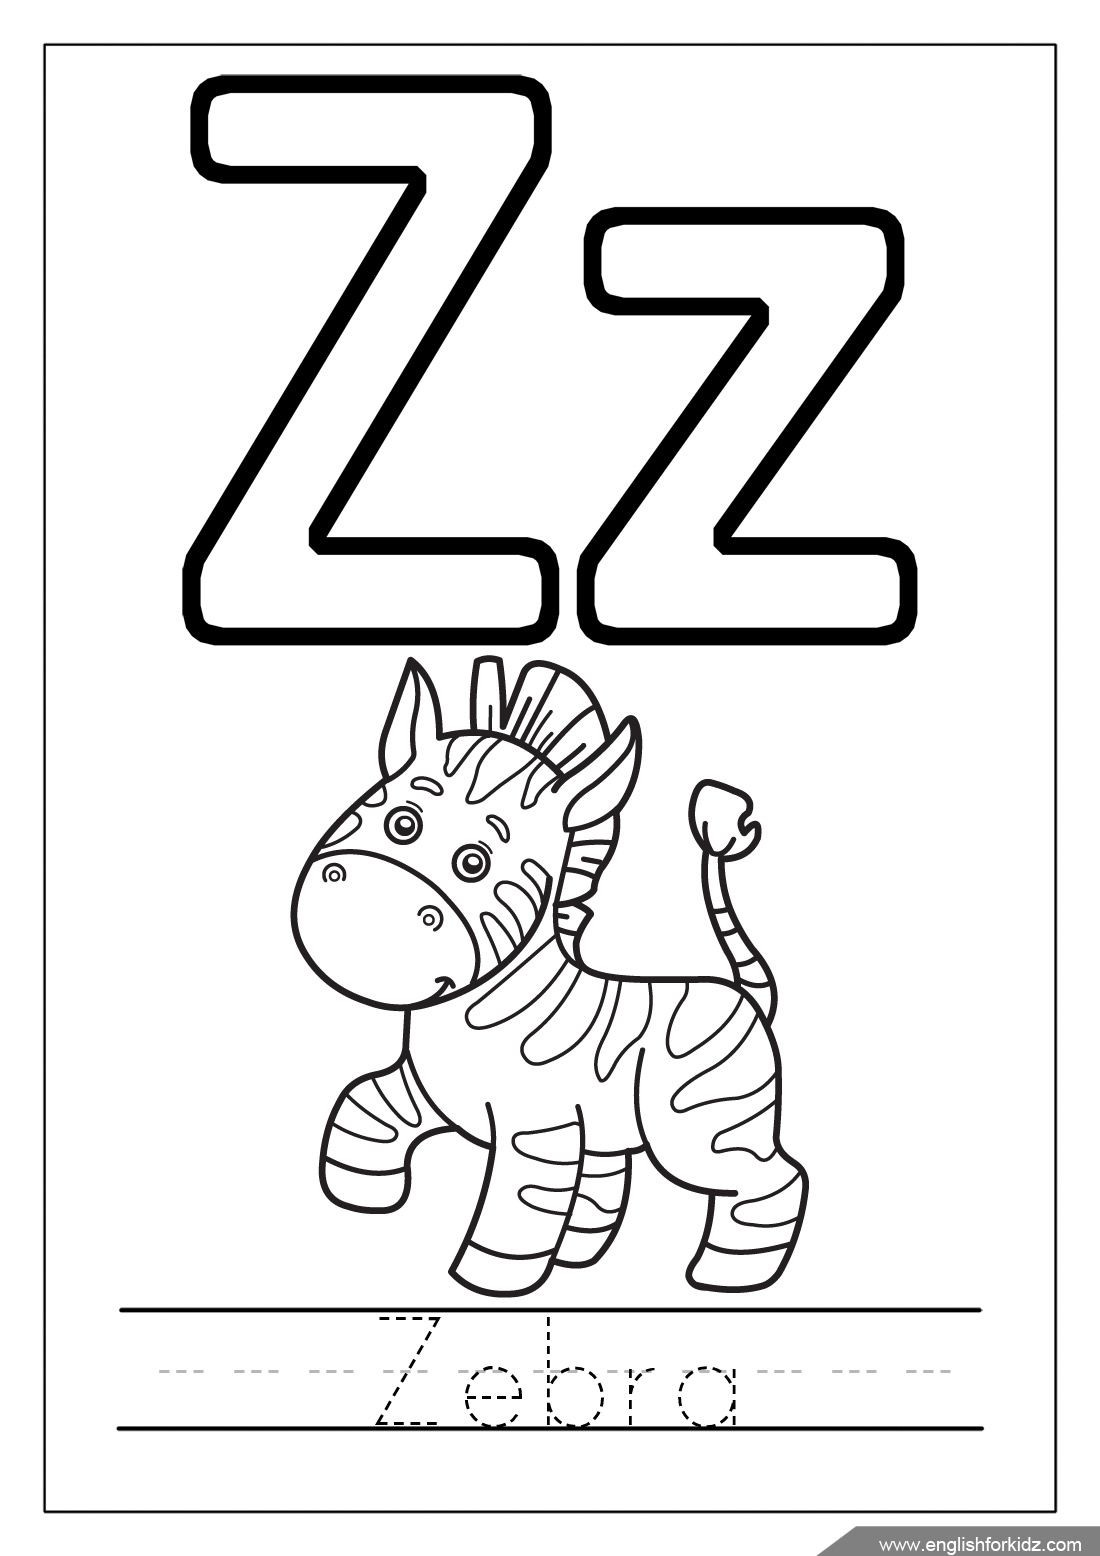 English Coloring Pages at GetDrawings.com | Free for ...